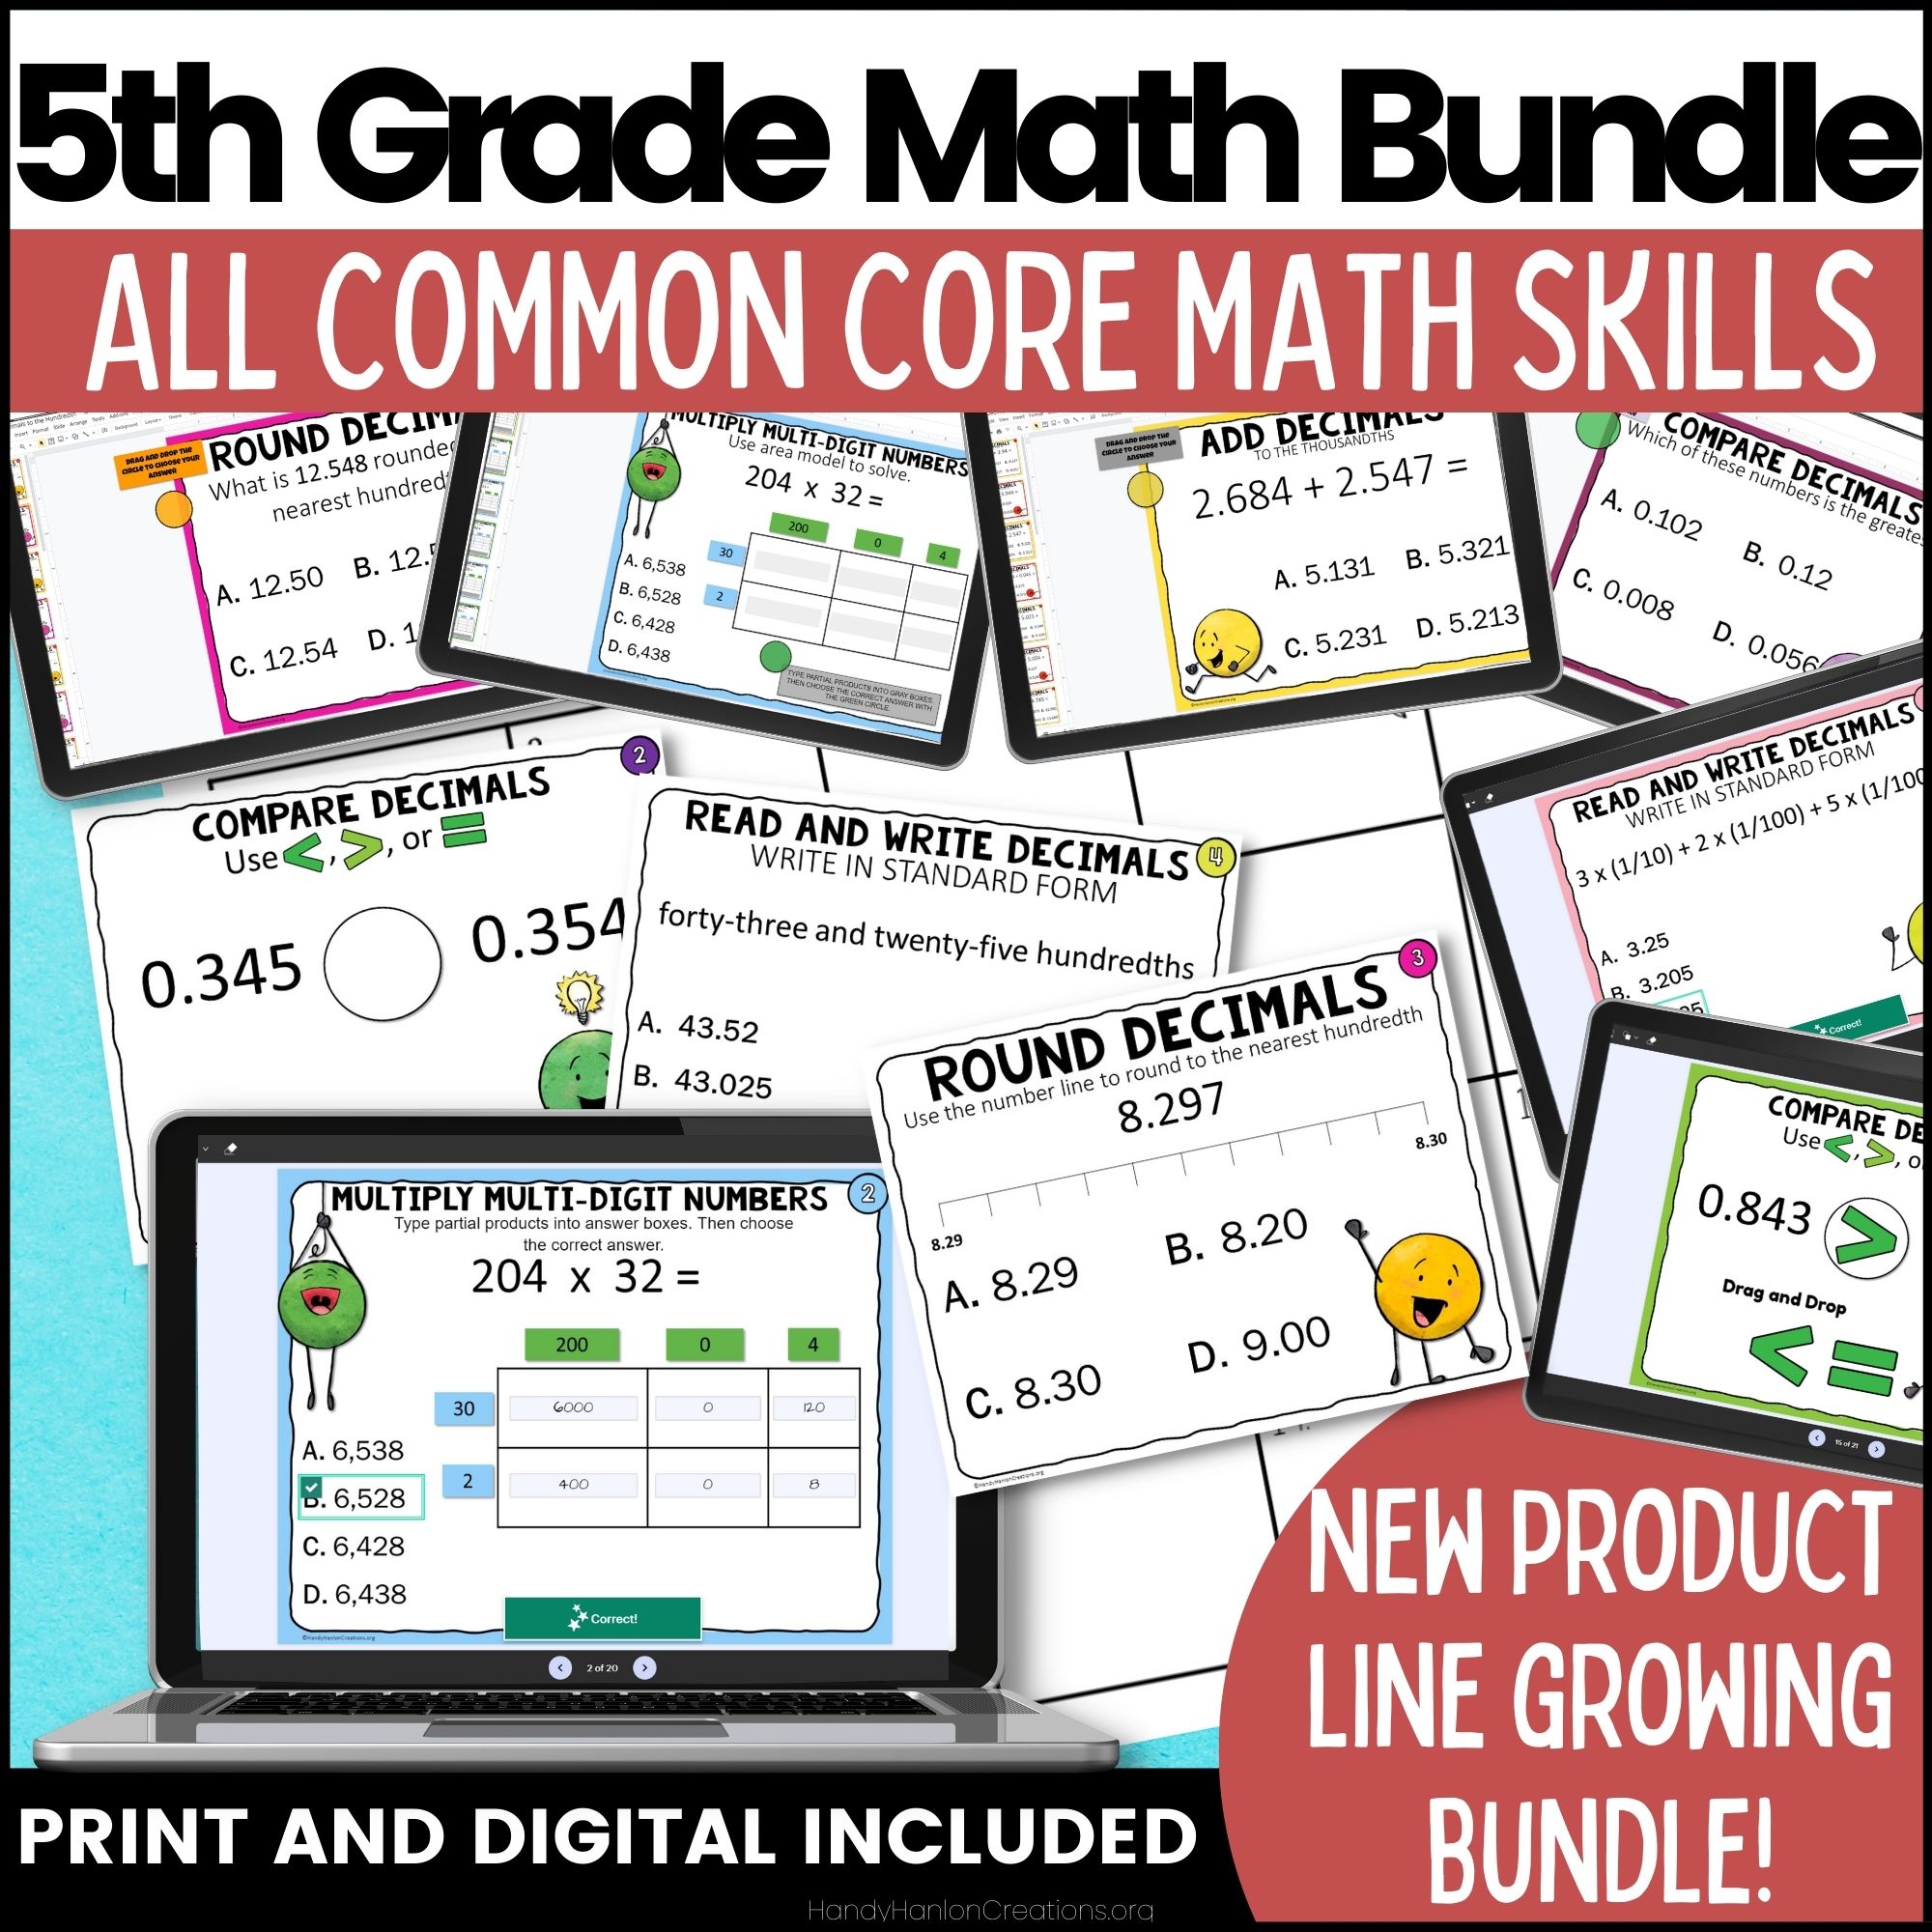 This discounted bundle covers a range of topics that are typically taught in 5th grade math, such as fractions, decimals, geometry, and more. They are designed to be engaging and interactive, with colorful graphics and a variety of question types.